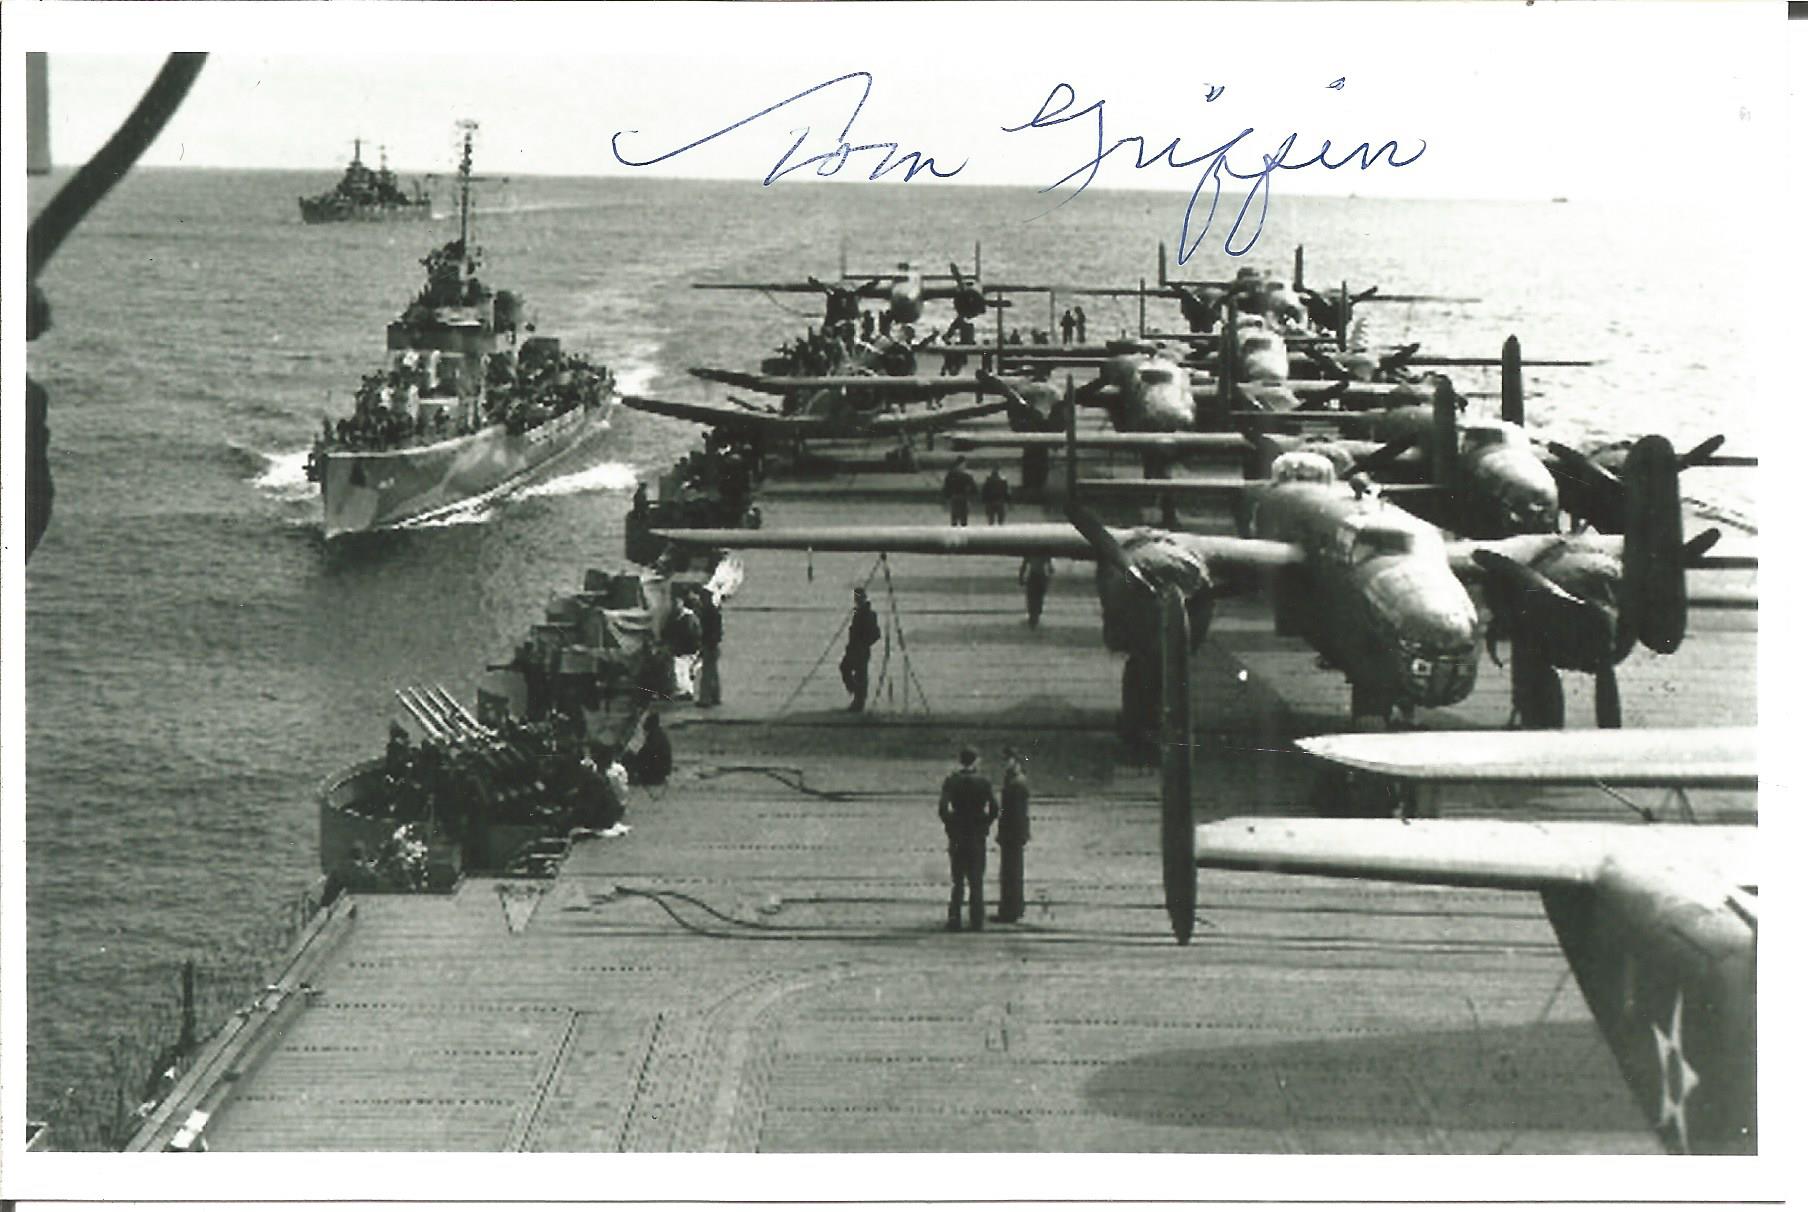 WW2 Doolittle Raider Tom Griffin signed 6 x 4 inch b/w photo of bomber on the Aircraft carrier. Good